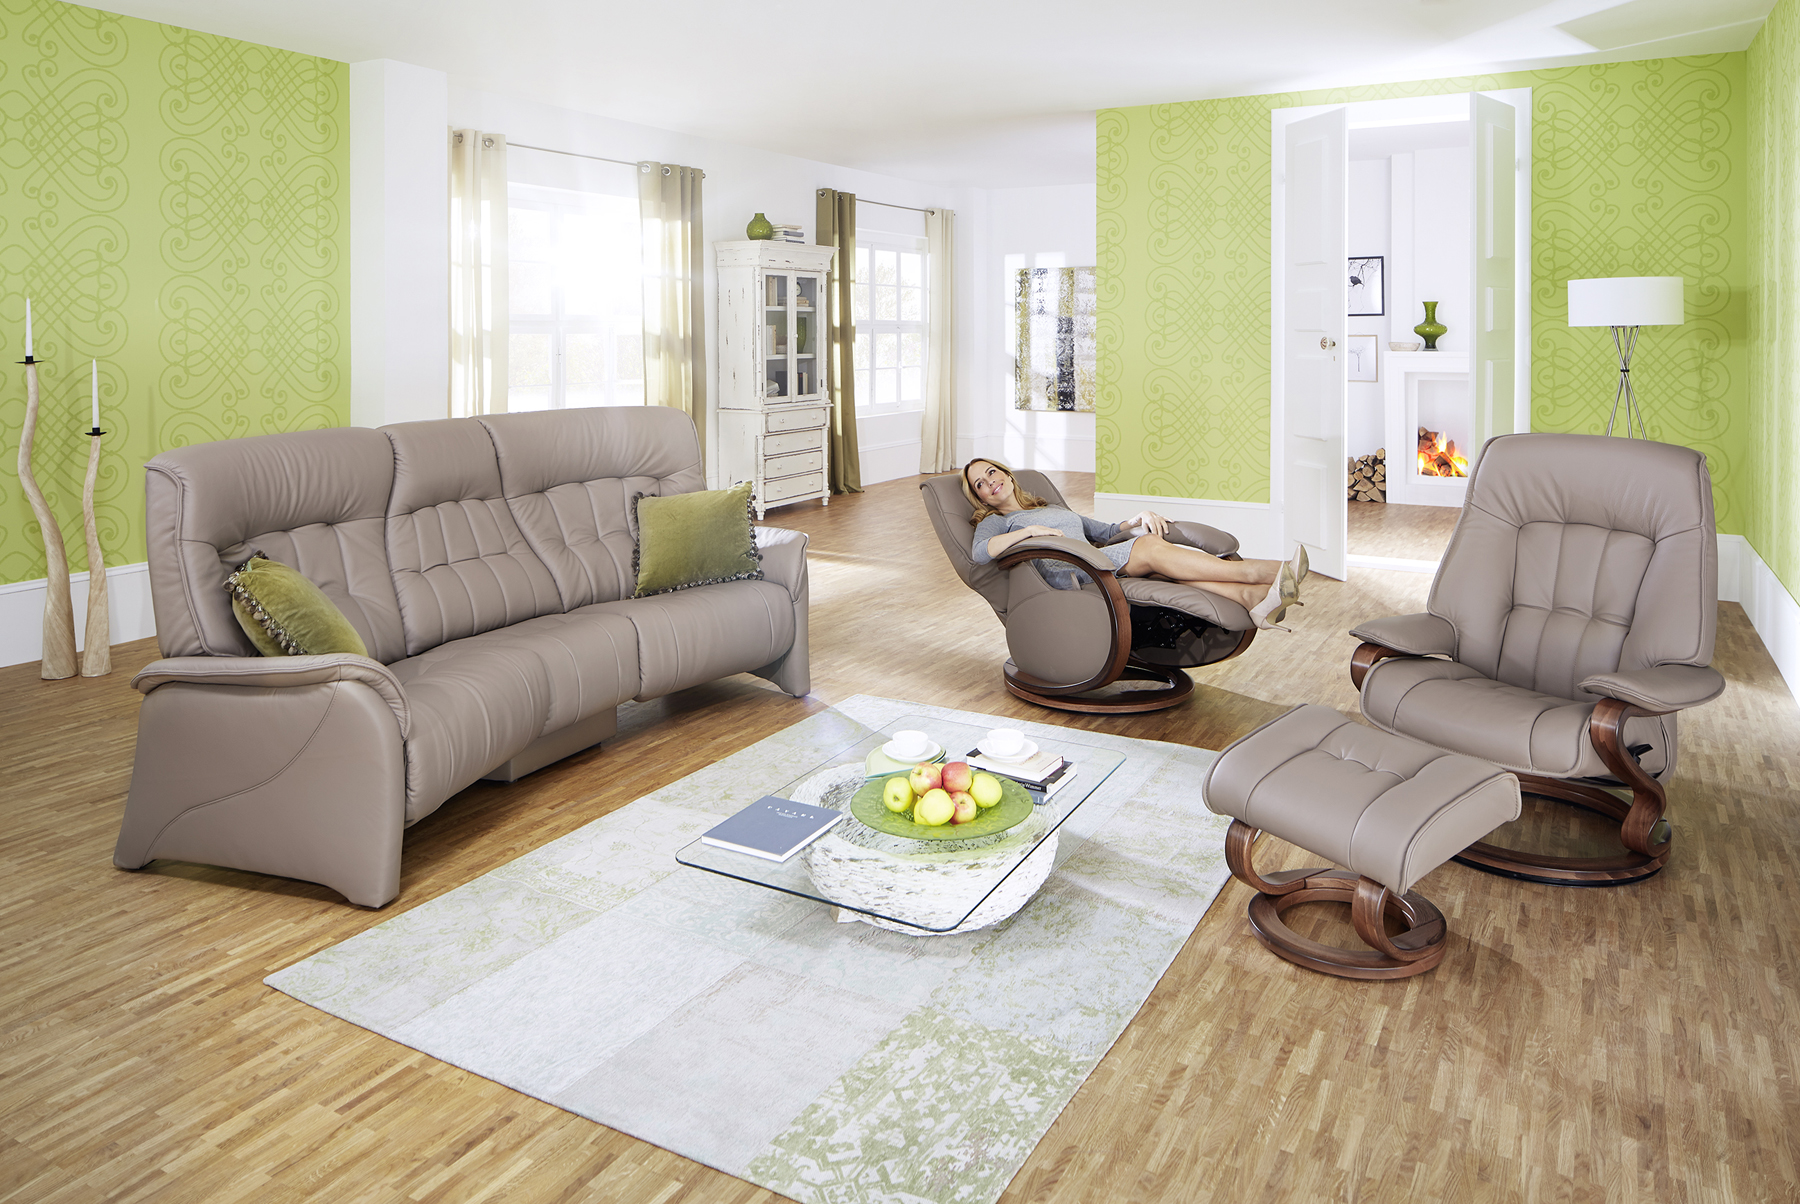 HIMOLLA RHINE SOFAS AND CHAIRS RECLINED ROOM SET